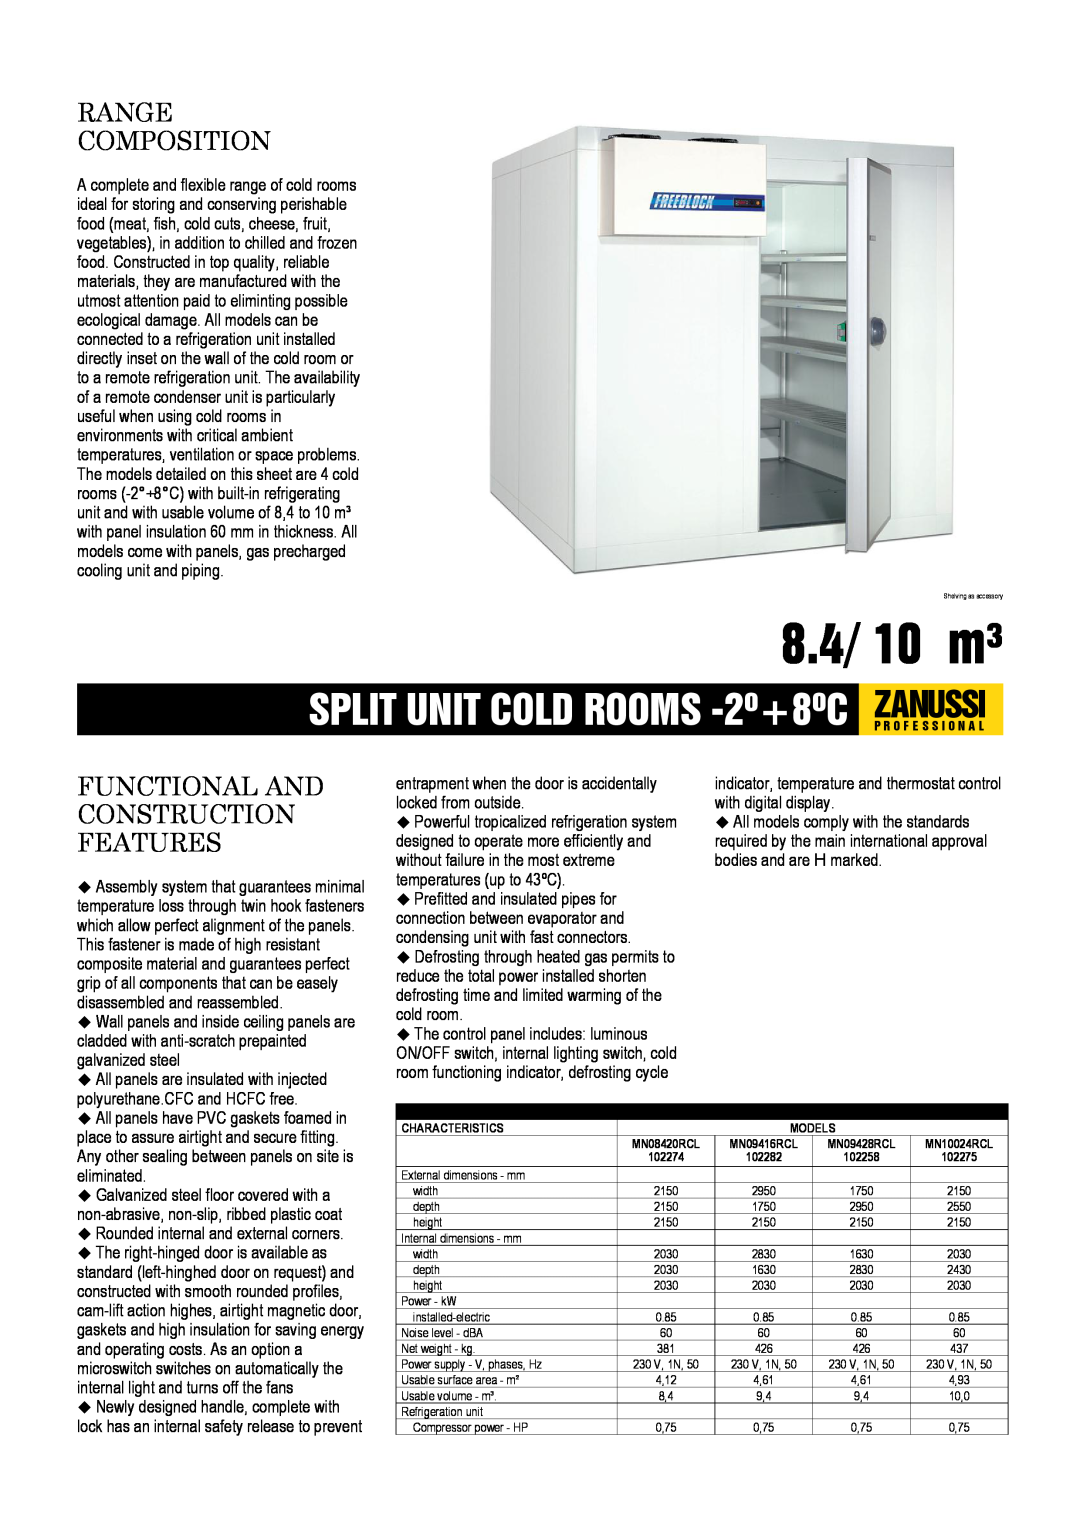 Zanussi MN10024RCL, MN08420RCL, MN09416RCL dimensions 8.4/ 10 m³, Range Composition, Functional And Construction Features 